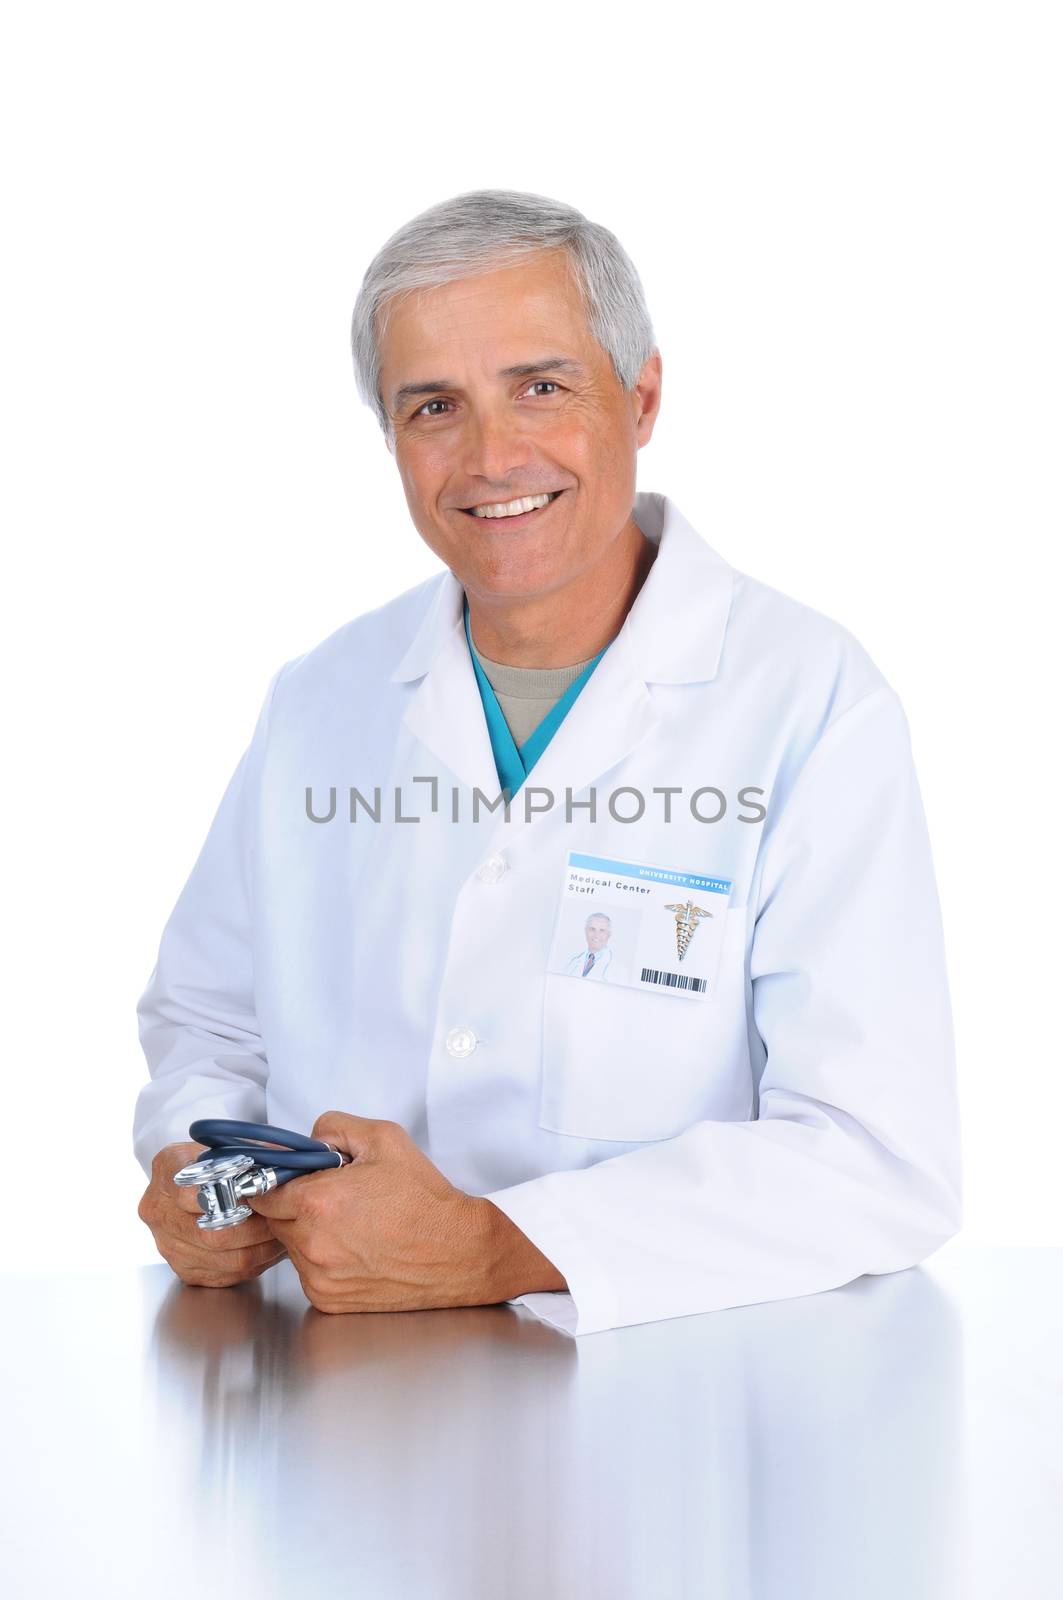 Smiling middle aged doctor seated and holding his stethoscope in both hands. Man is wearing a lab coat and scrubs in vertical format over a white background.